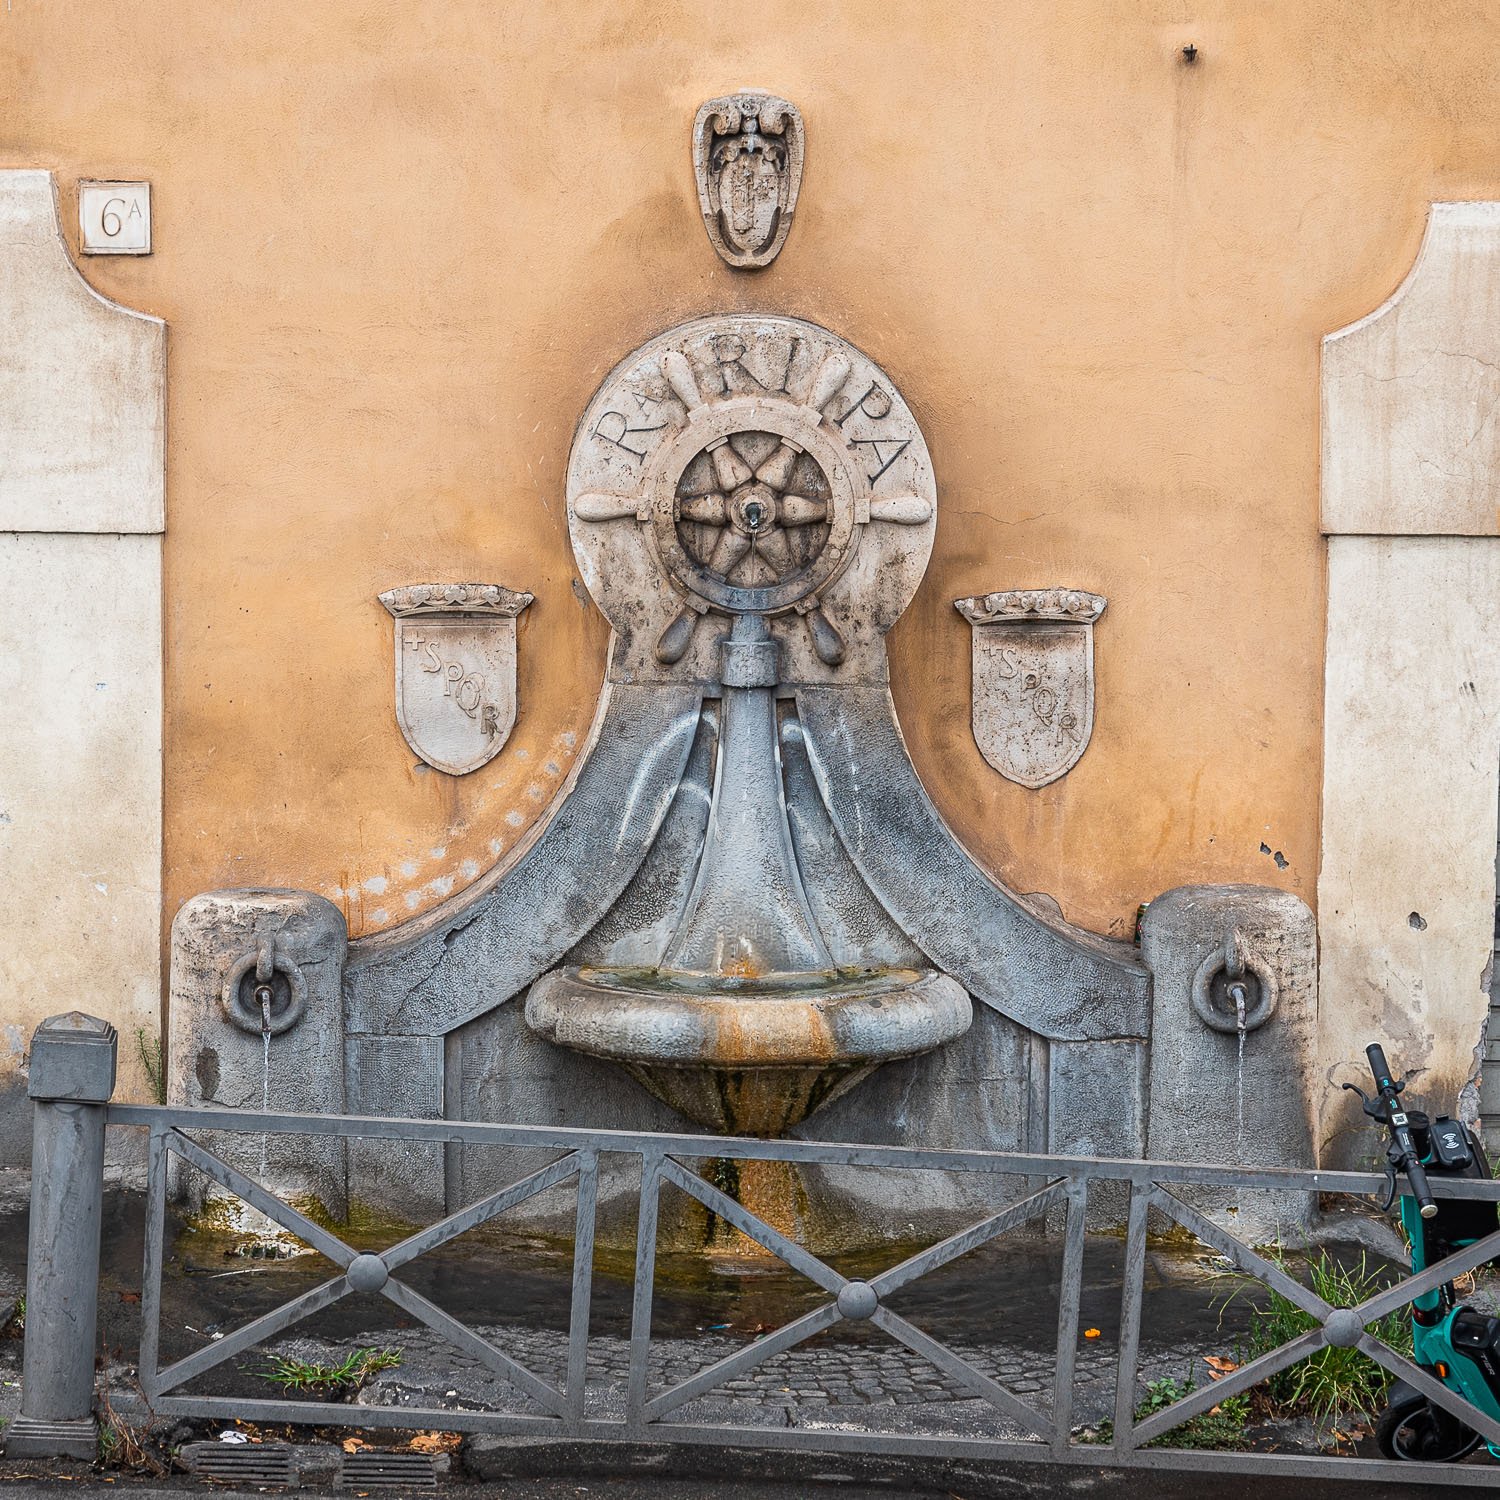 famous fountains in rome italy - Ship's Wheel